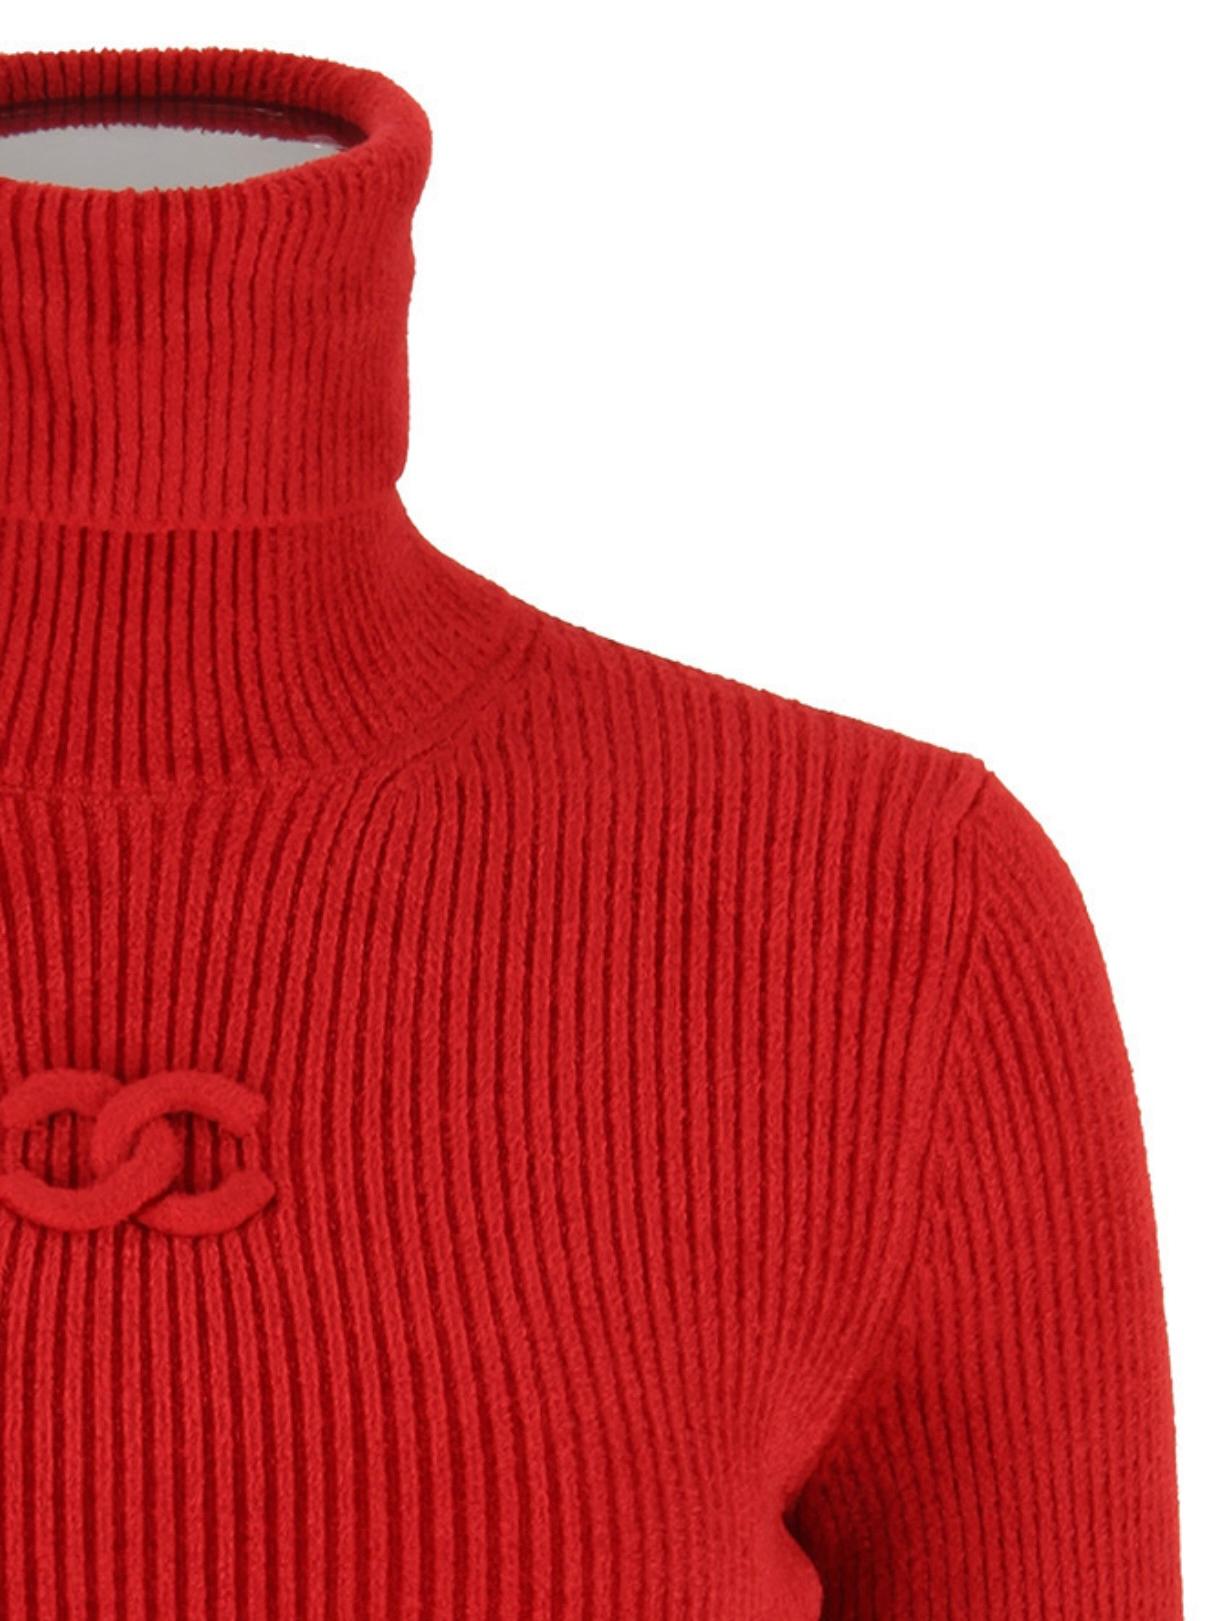 Chanel red turtleneck jumper with CC logo at front
Size mark 36 FR, condition is pristine